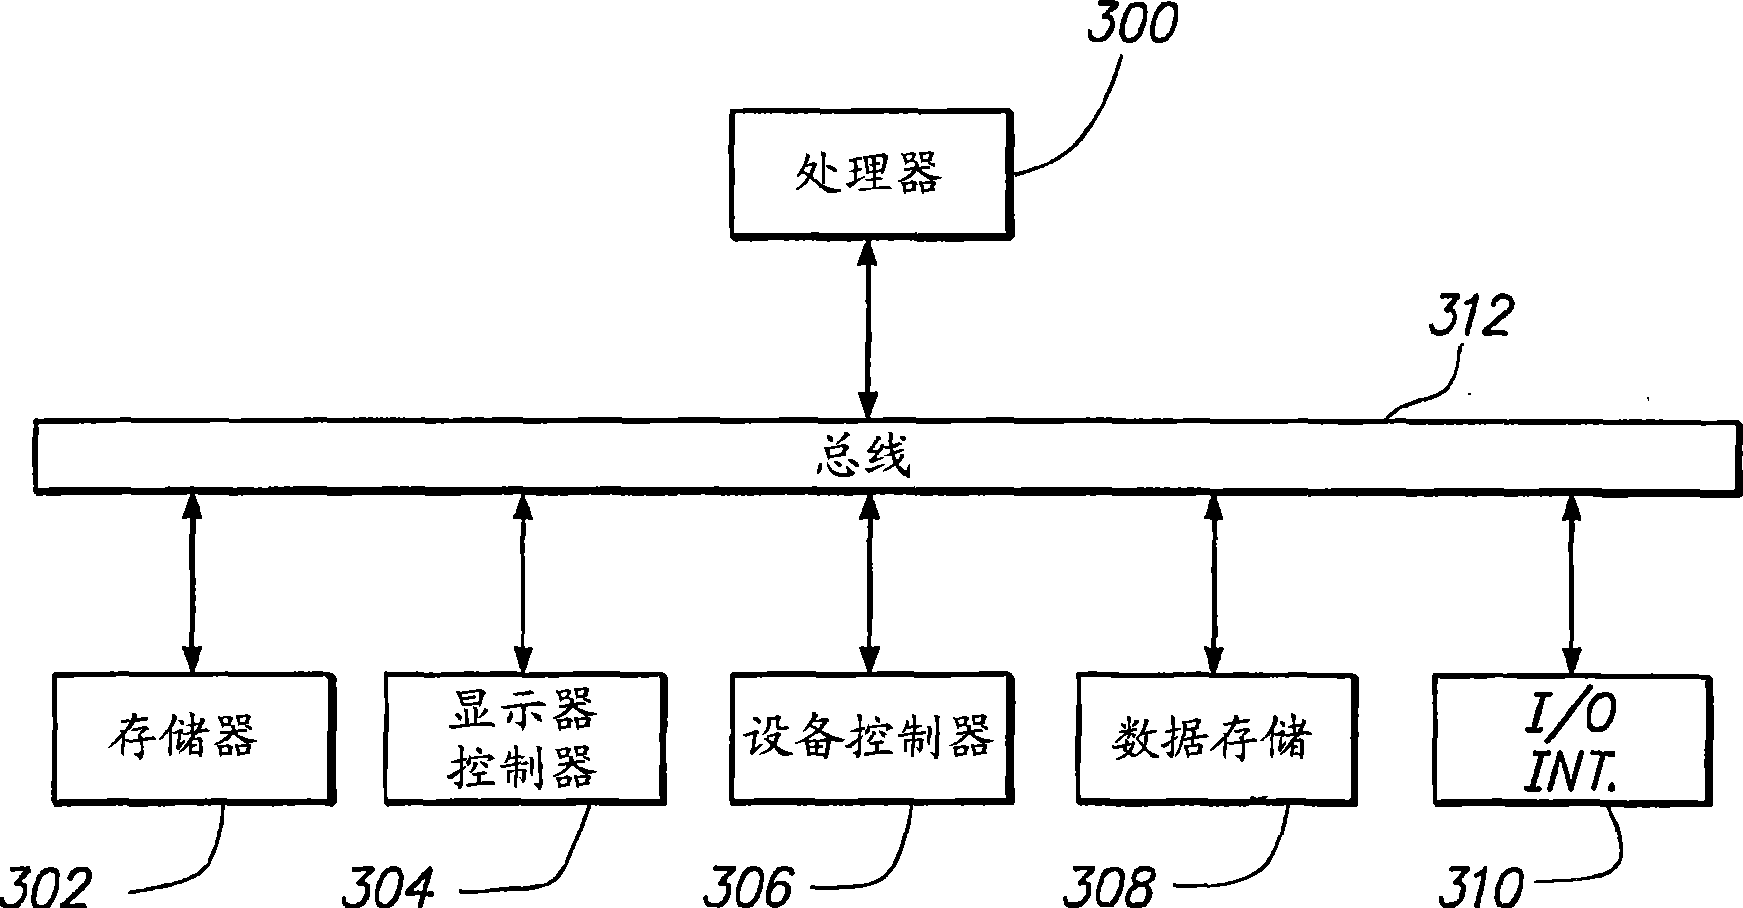 Scaling and layout methods and systems for handling one-to-many objects